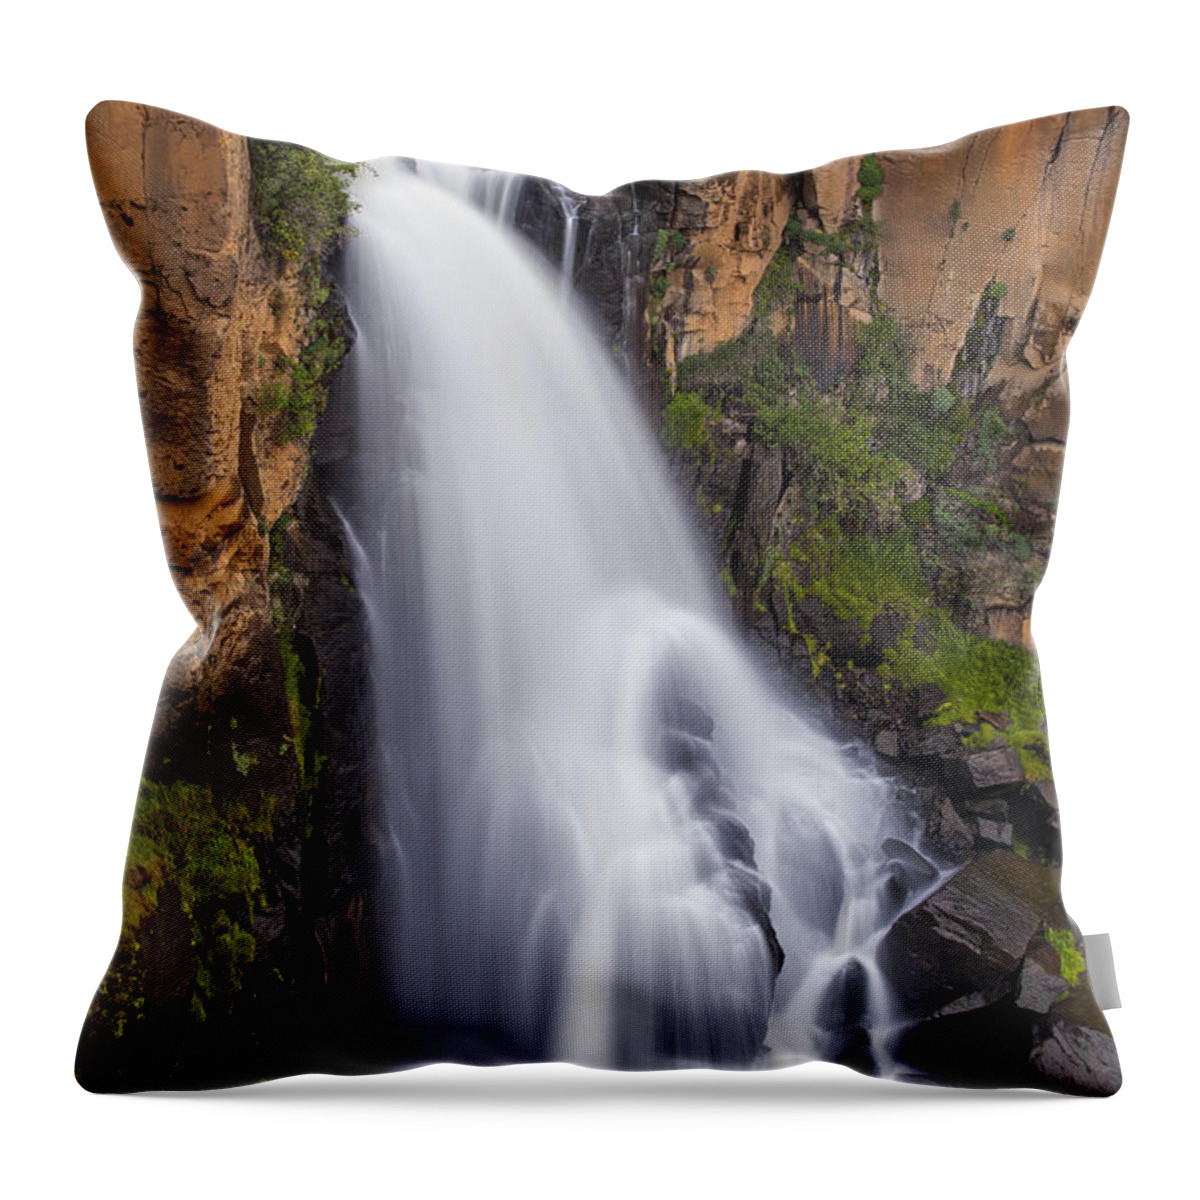 Waterfall Throw Pillow featuring the photograph Chasing Waterfalls by Tim Reaves